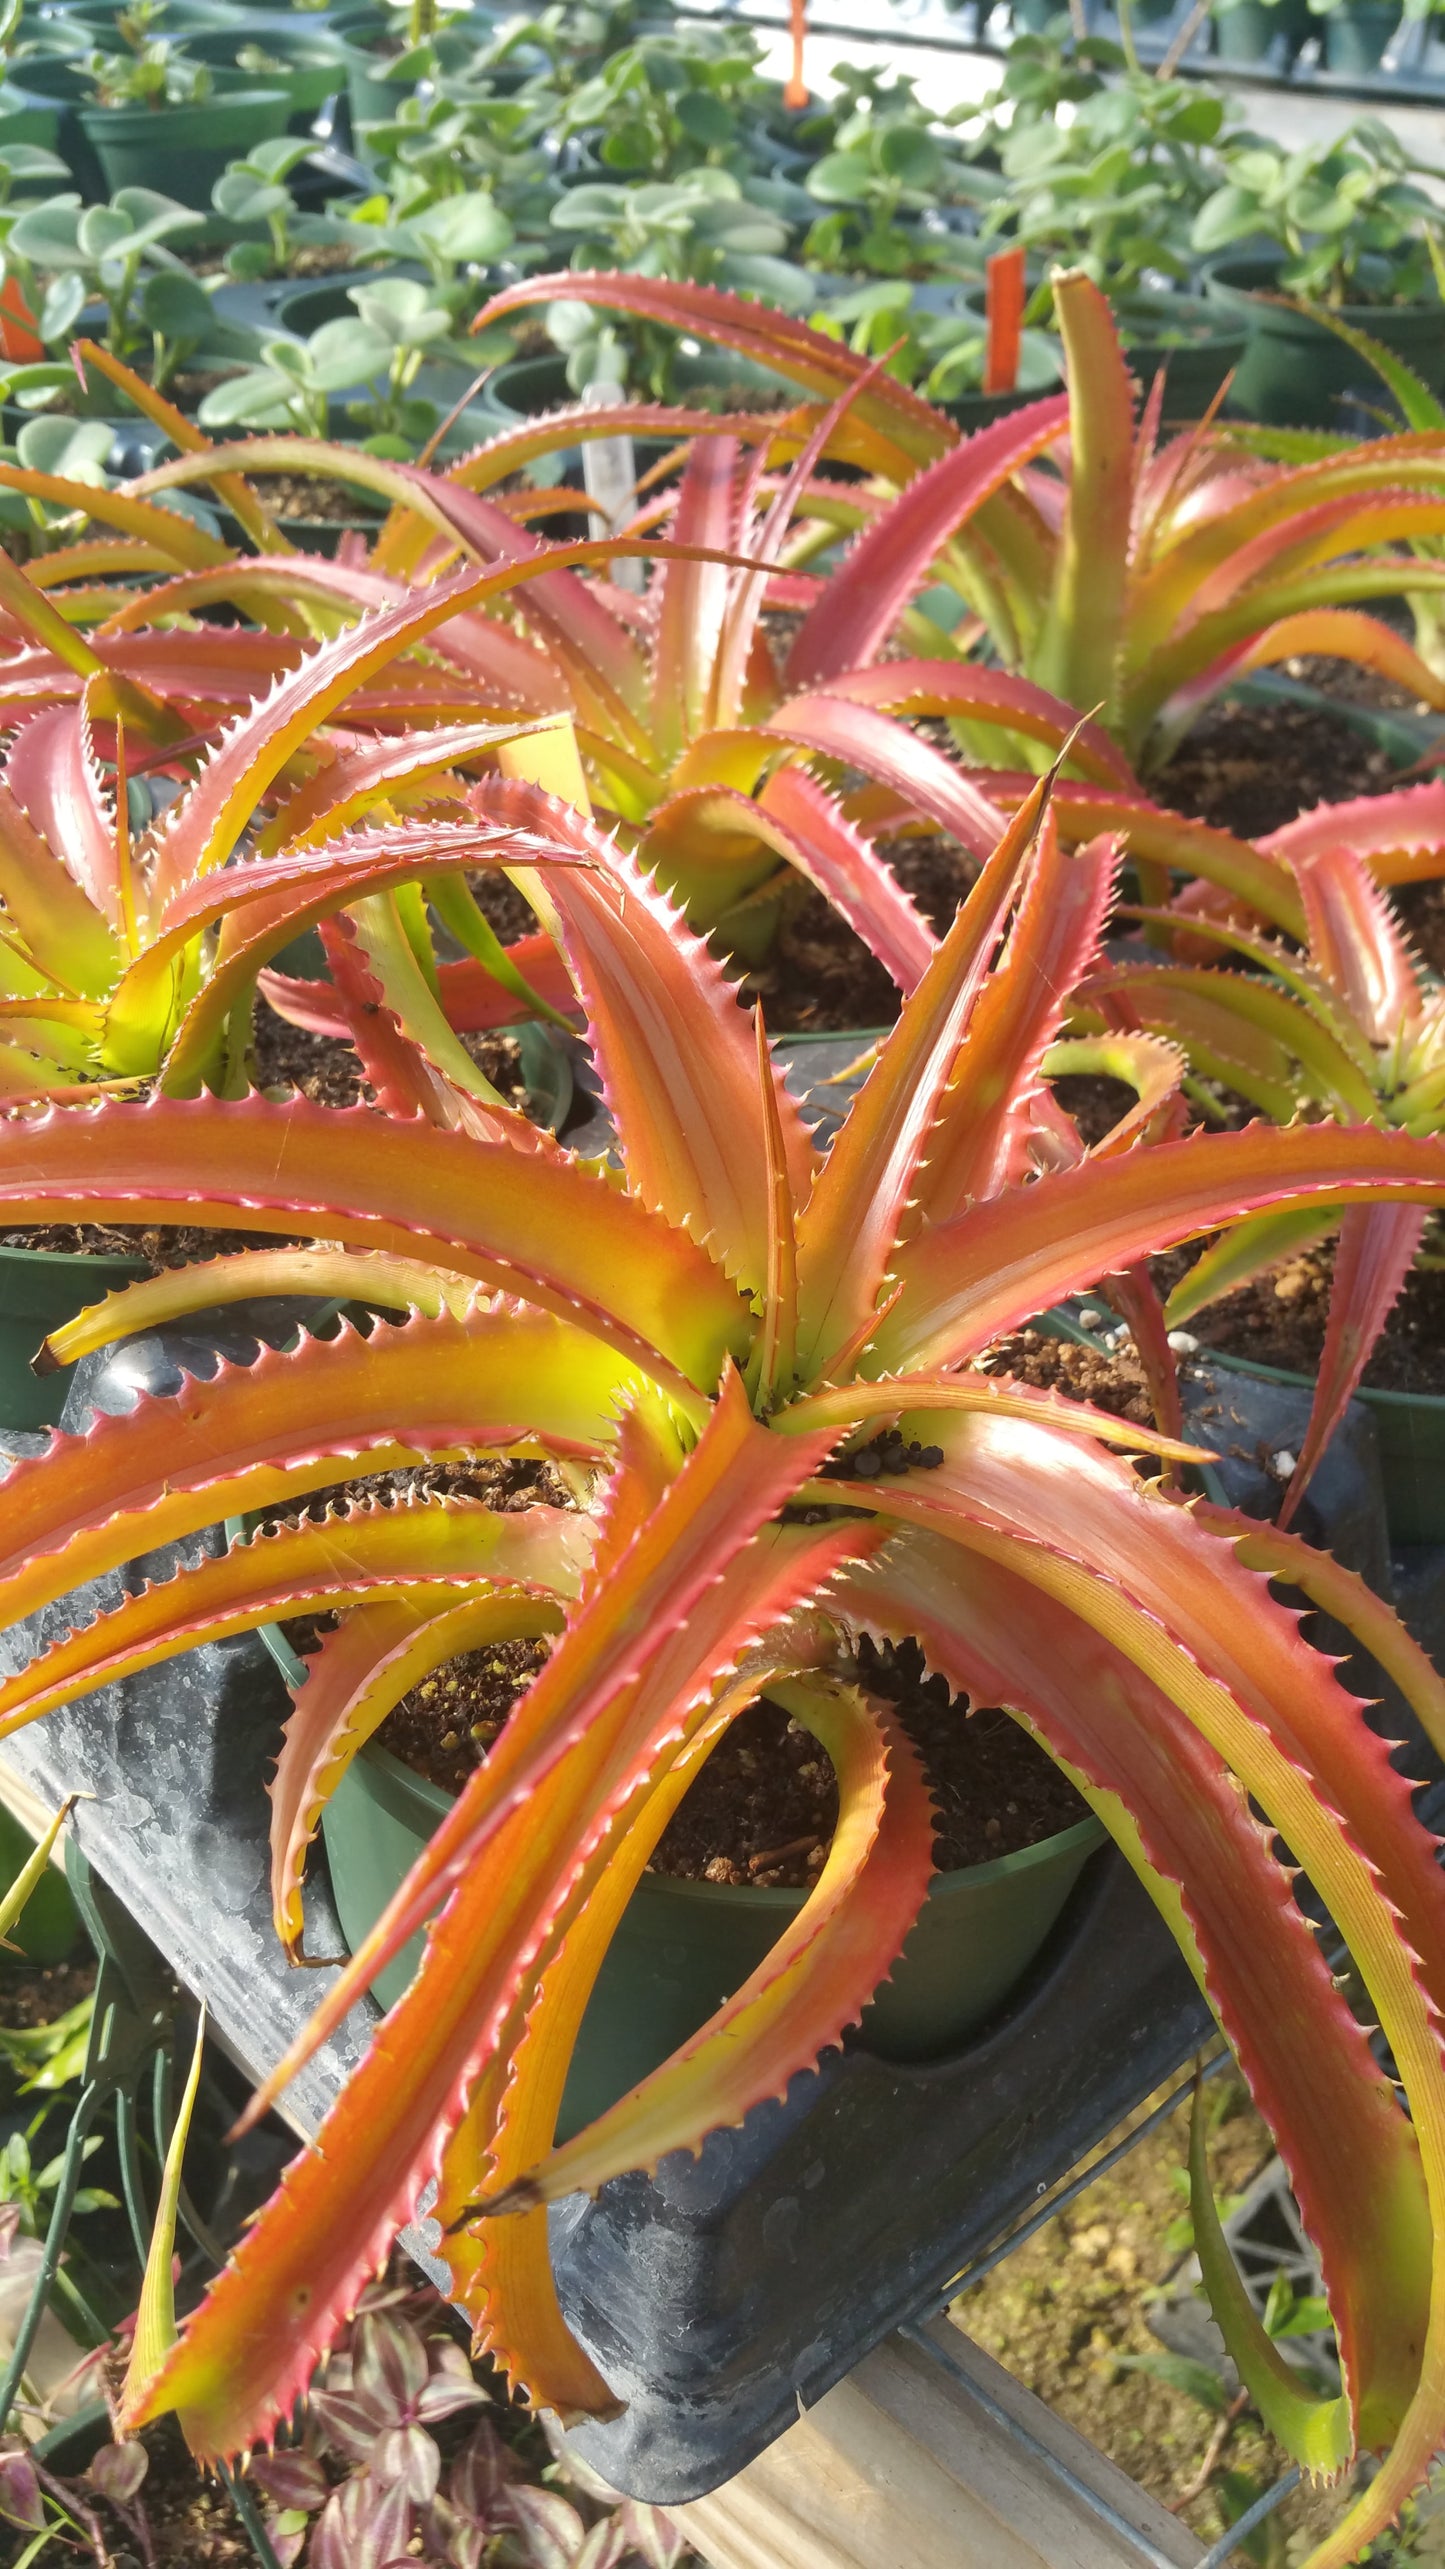 Bright orange agave-like plant with long slender leaves with spikes down both sides of each leaf